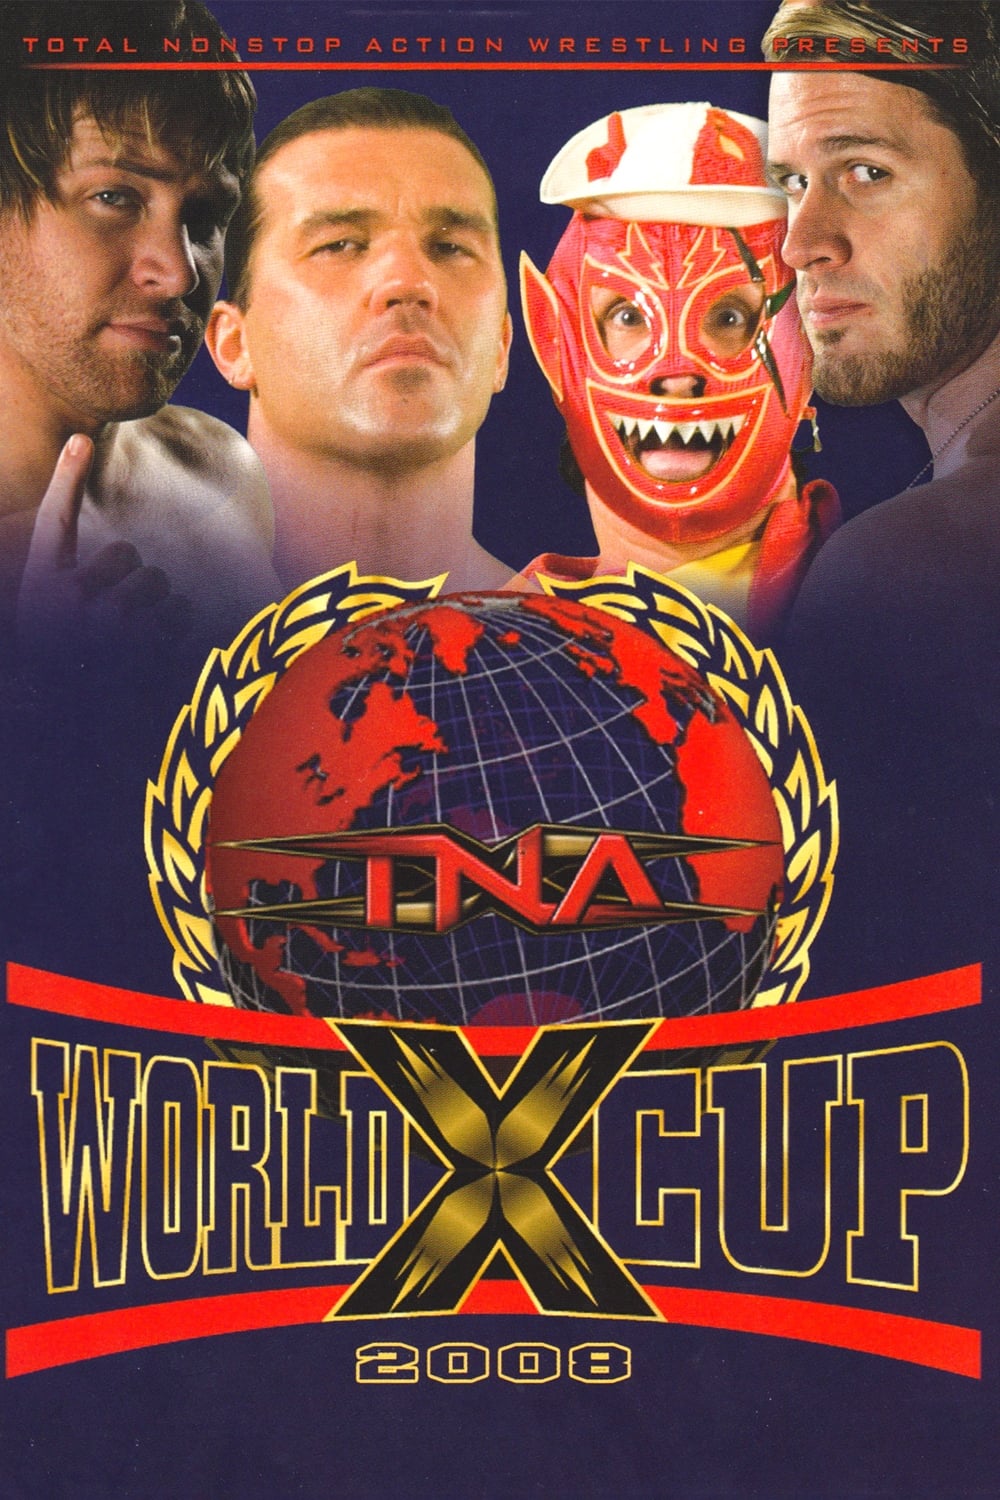 TNA World X Cup 2008